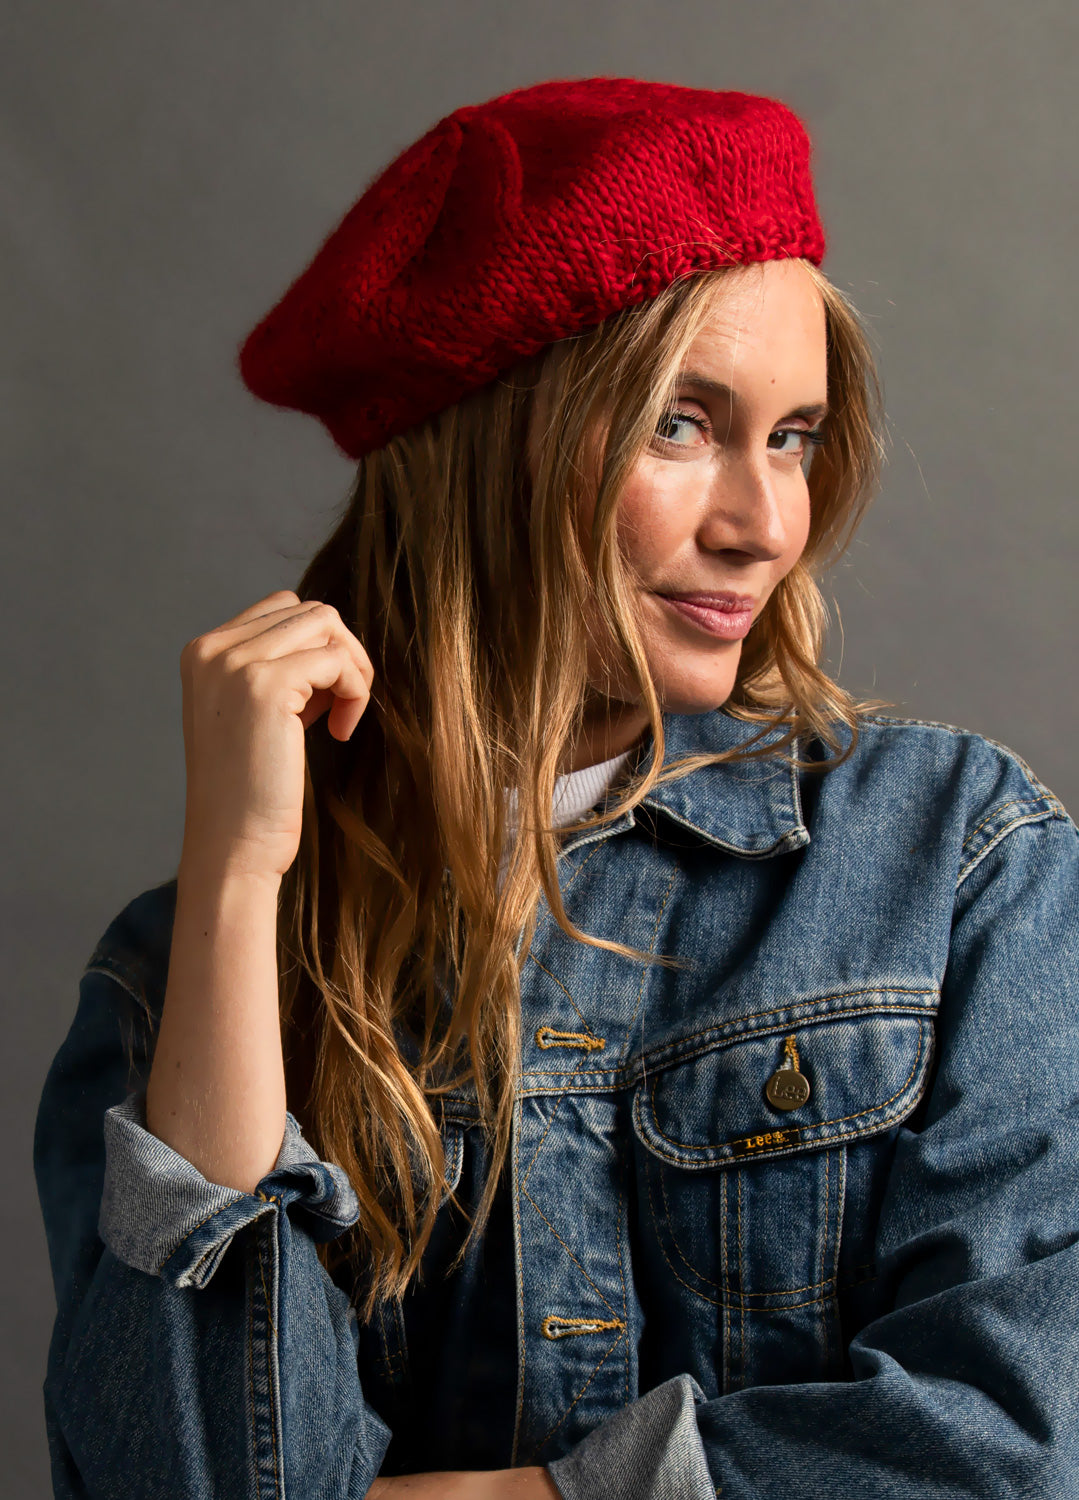 We are Beret knitters – Carrousel